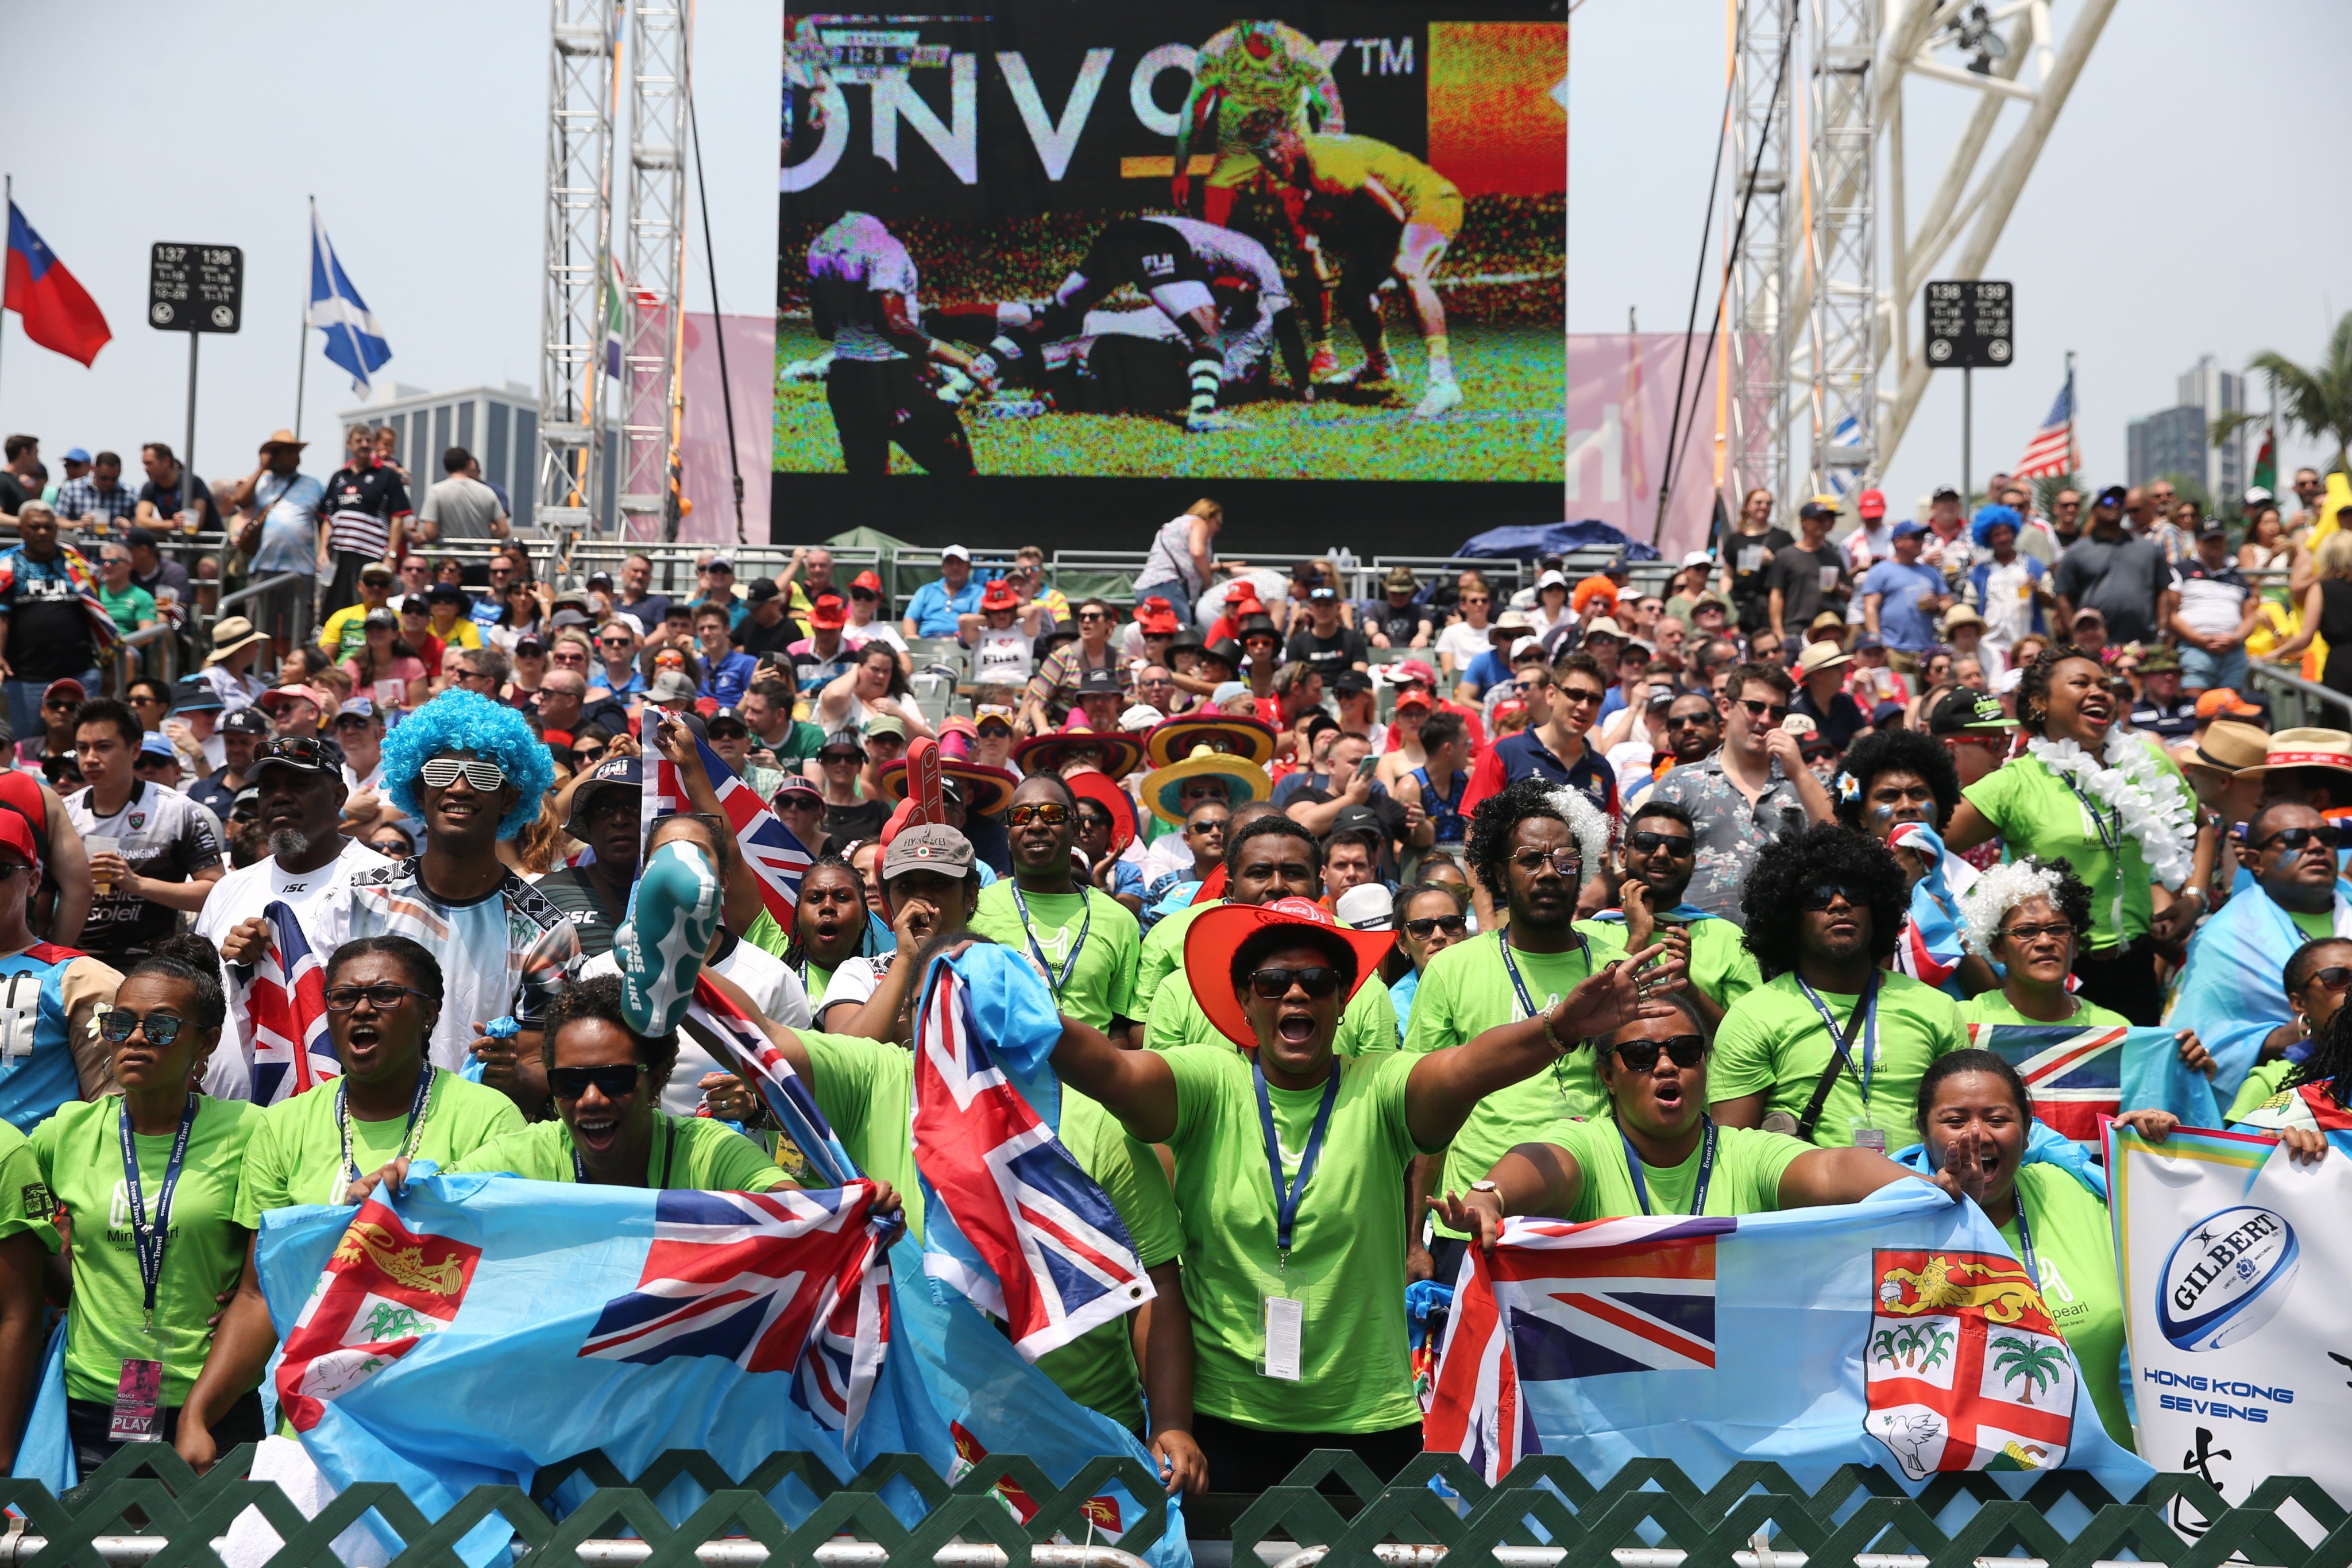 Fiji fans cheer their team on in the South Stand during the 2019 Hong Kong Sevens at Hong Kong Stadium. Photo: SCMP